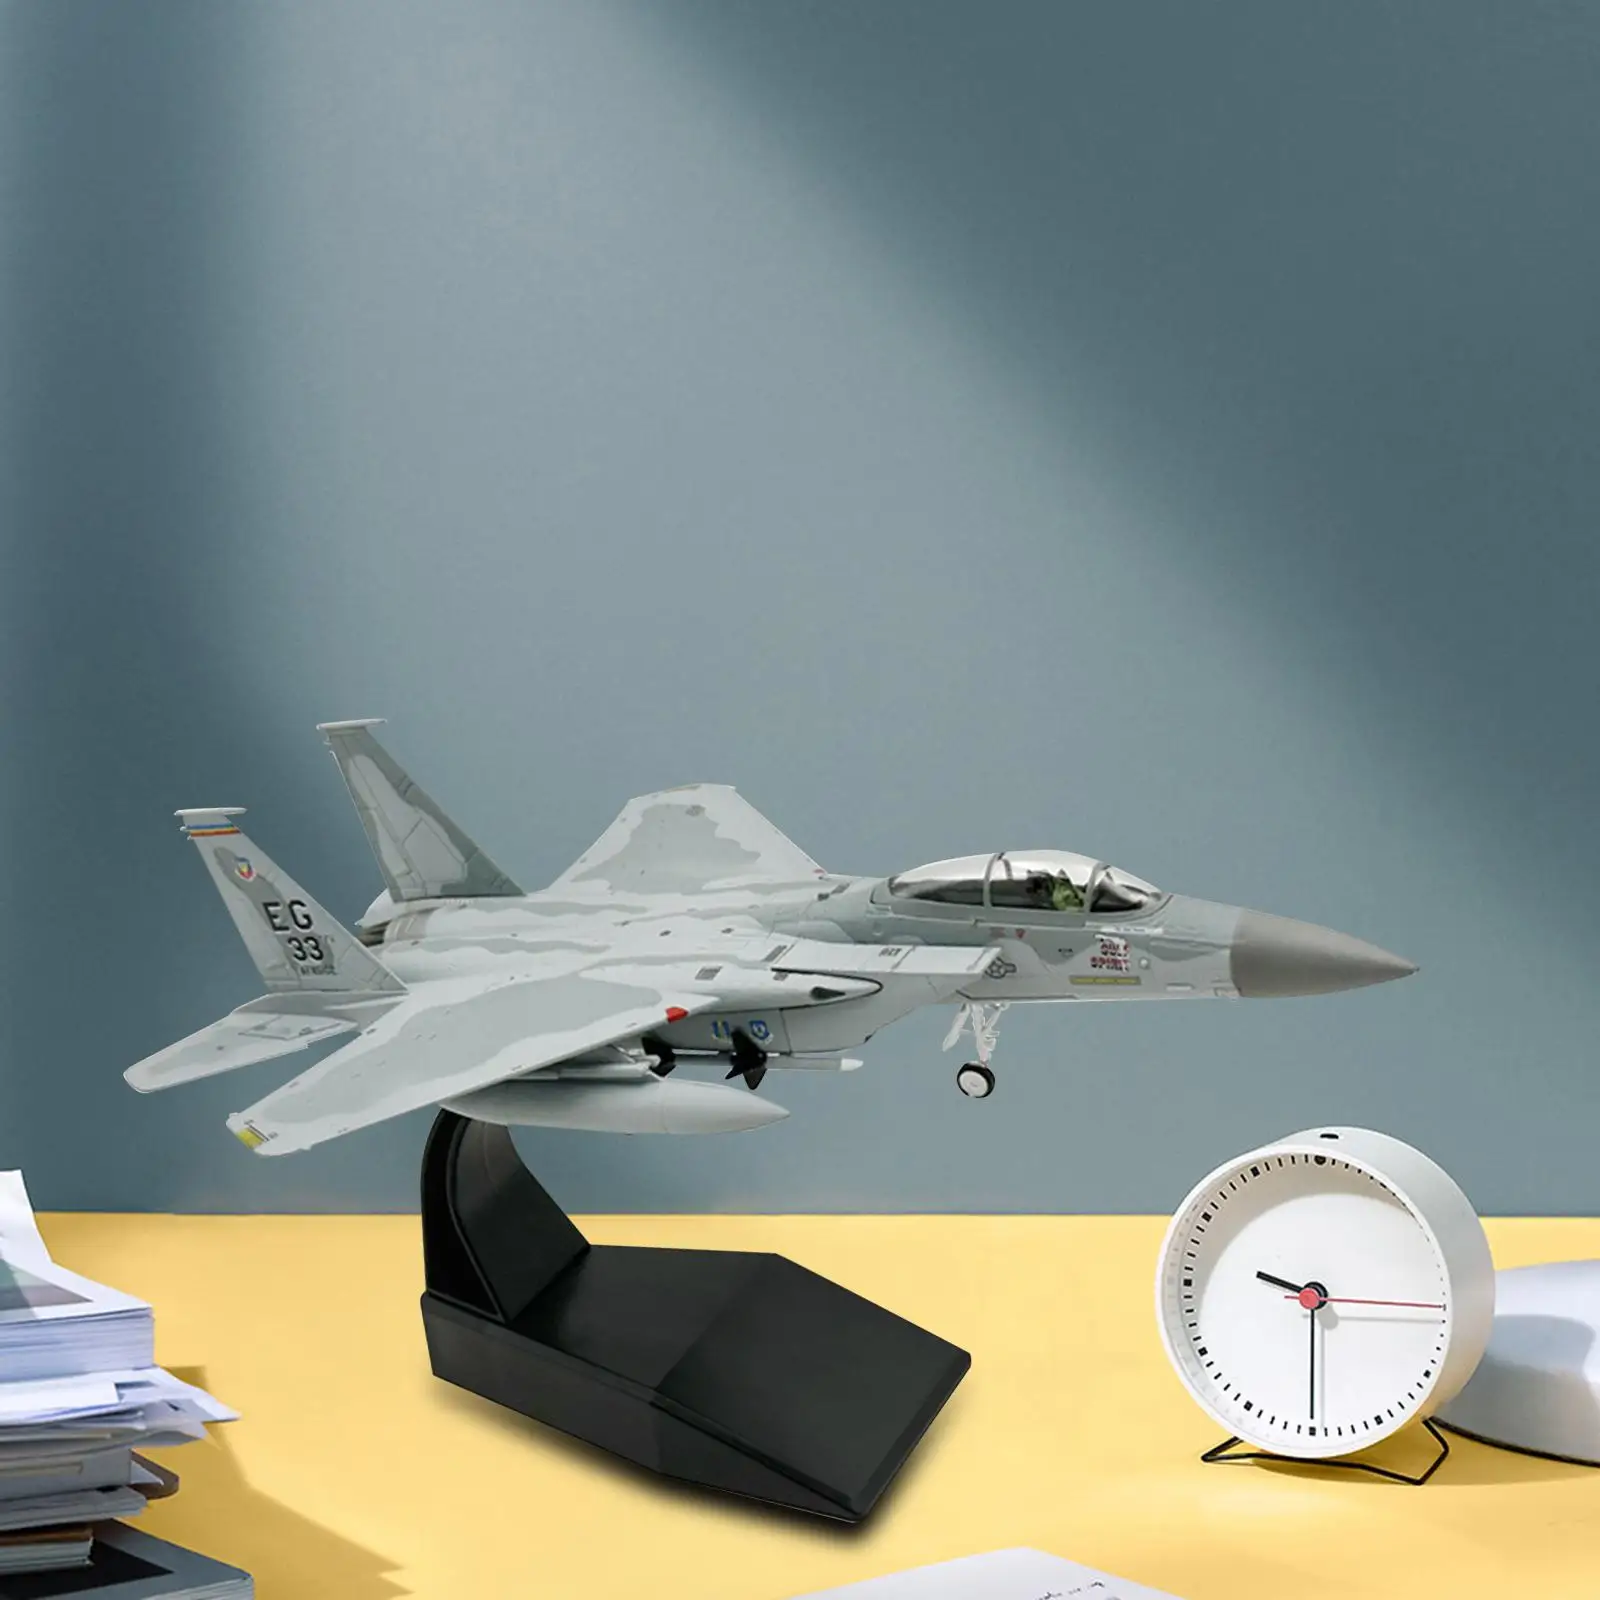 1/100 Scale F Model for Fighter Toy Office Decor Ornament